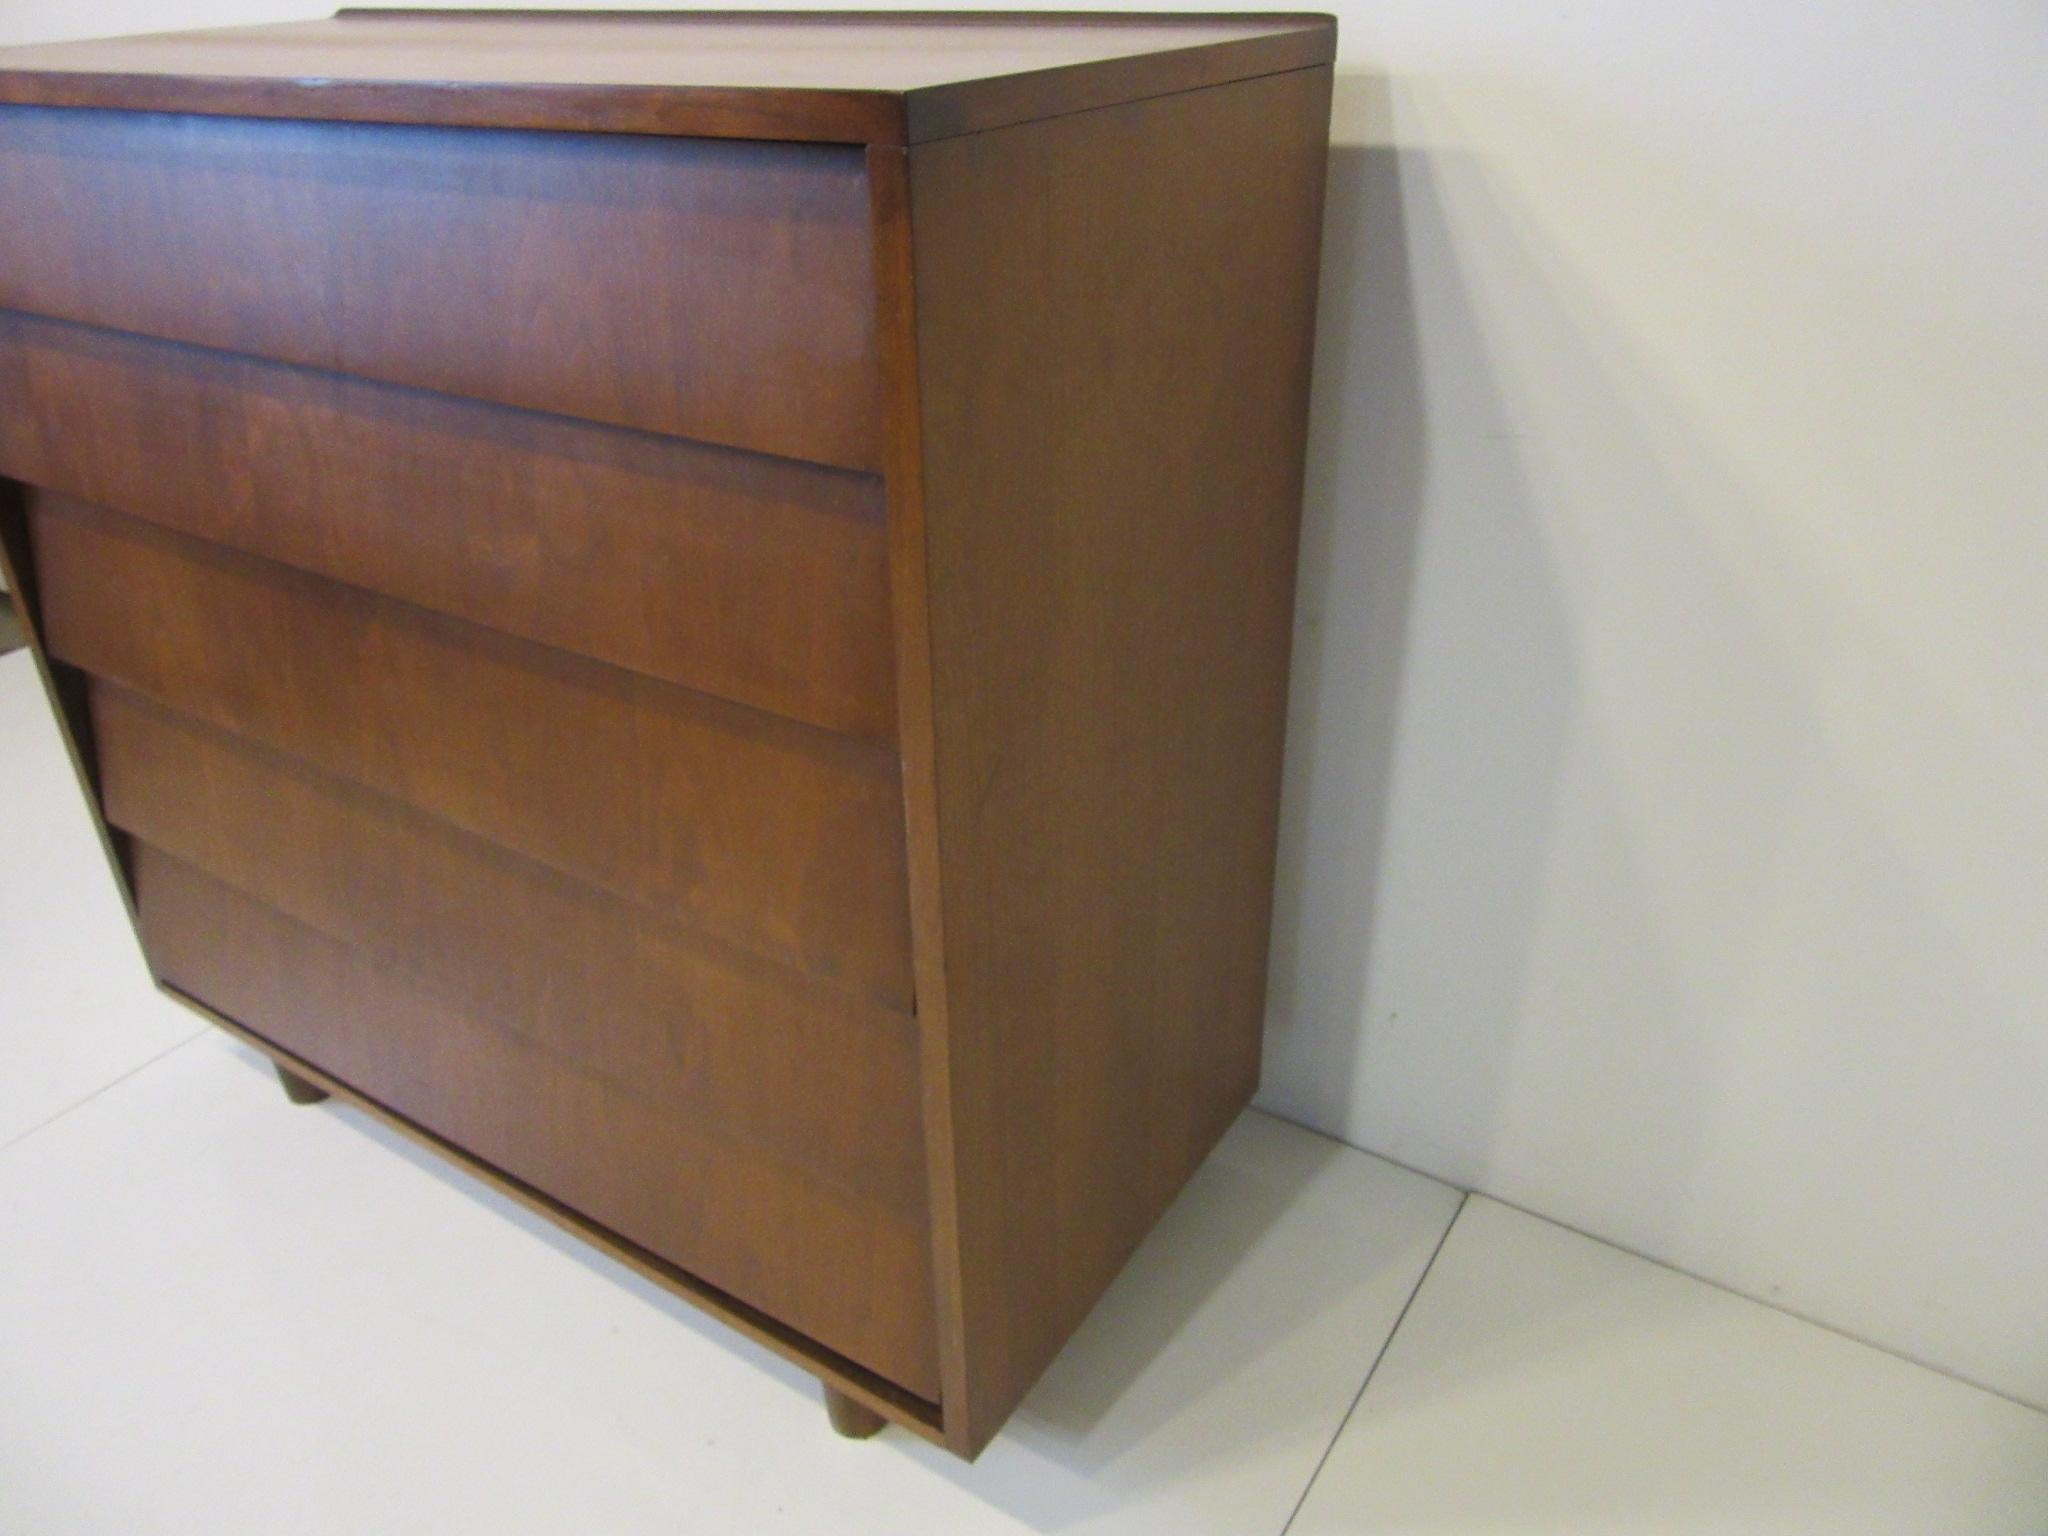 A walnut tall dresser / chest with five drawers with slanted fronts and a raised lip to the top back edge in the manner of Florence Knoll sitting on rounded legs, storage that makes a statement.